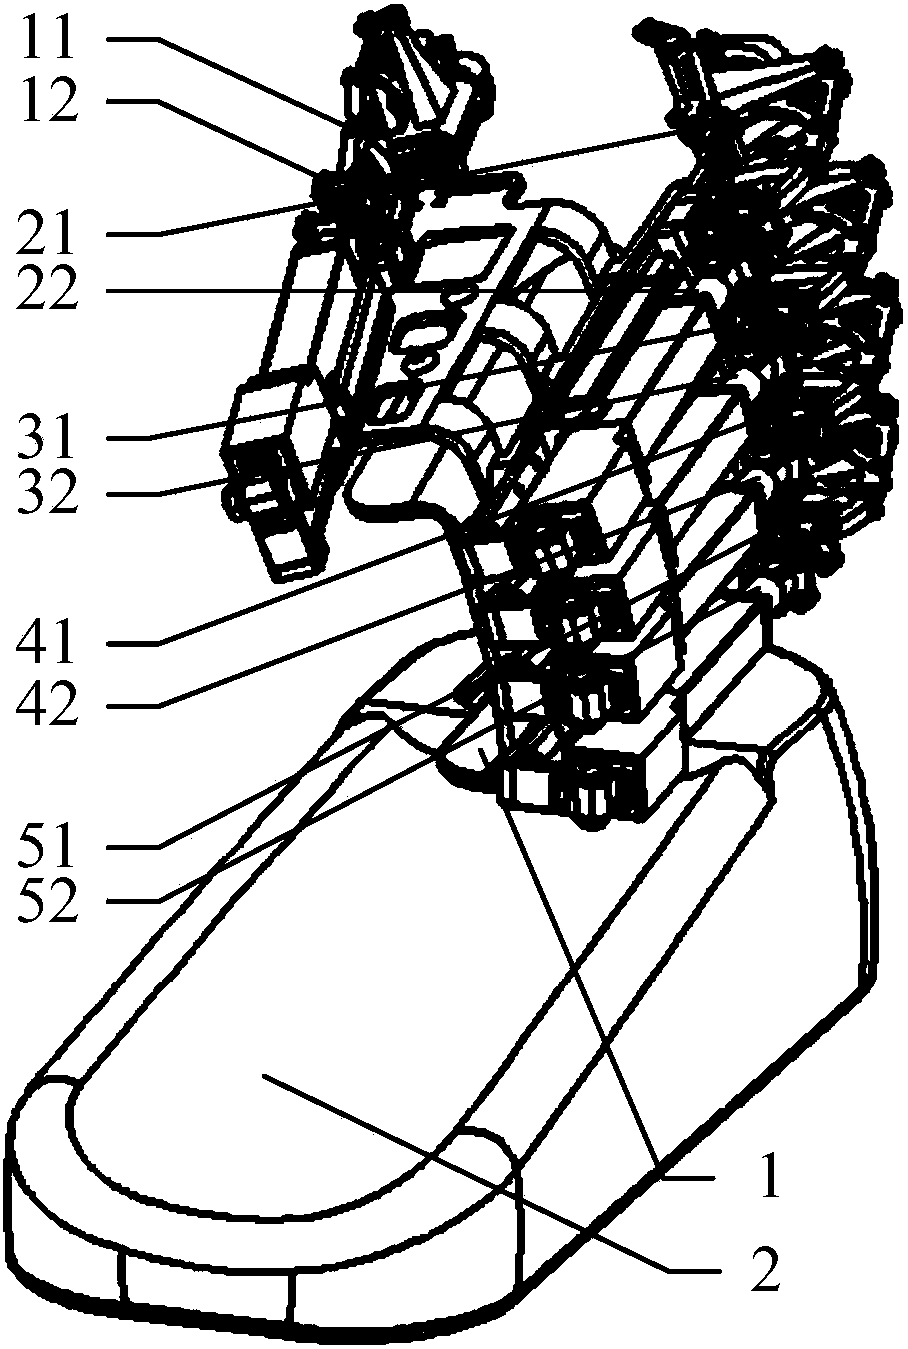 A flexible driving hand rehabilitation device and a feedback control circuit thereof